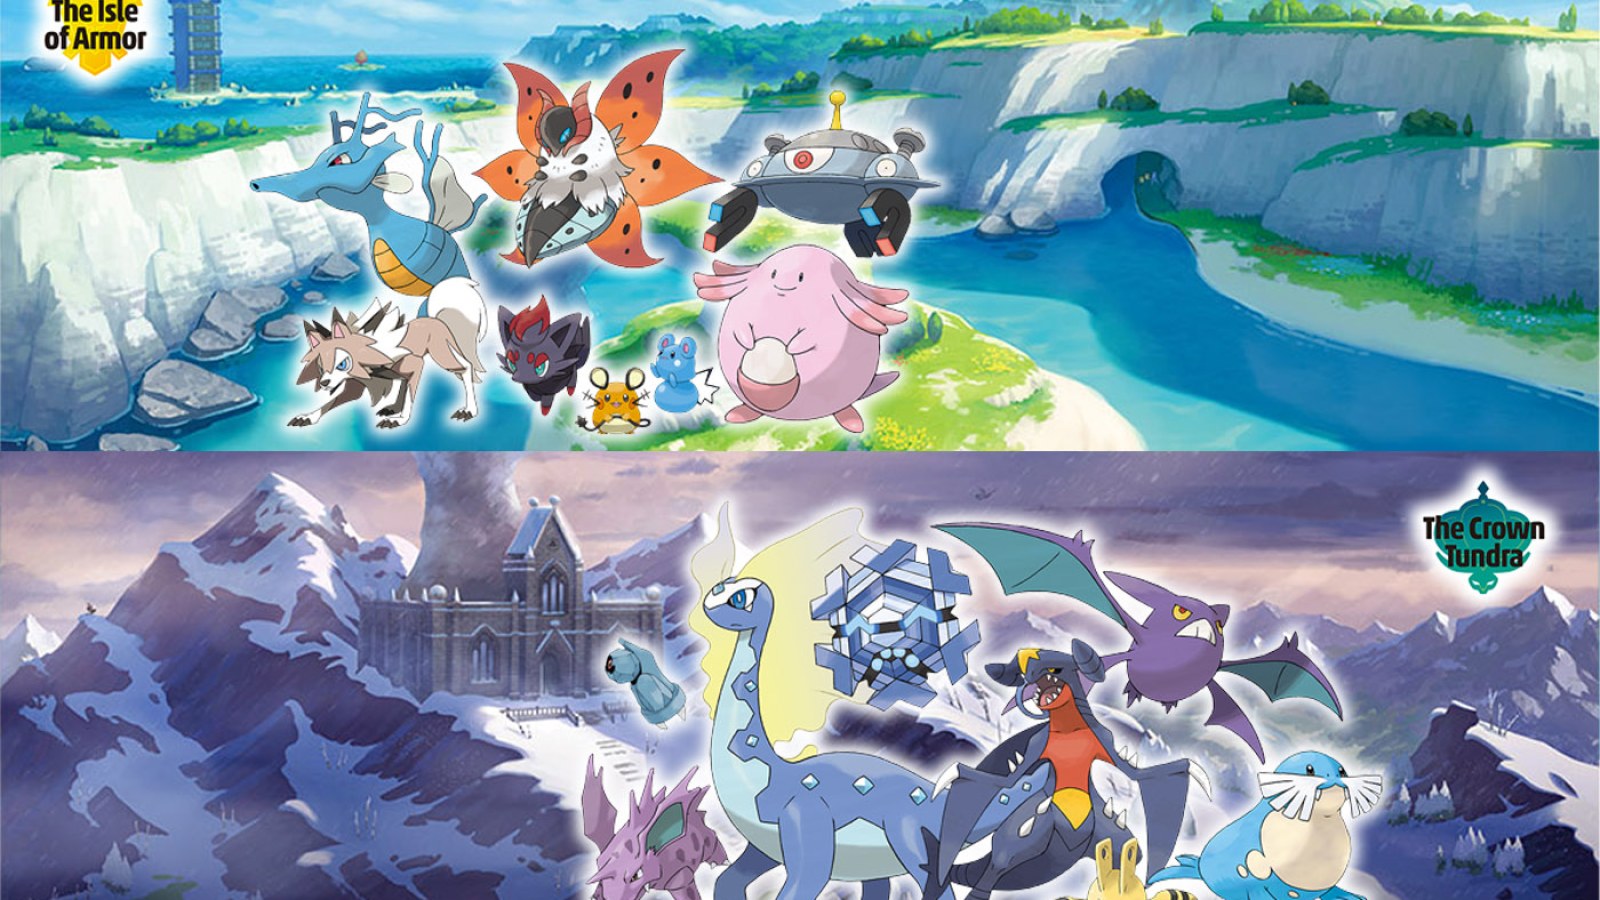 Pokemon Sword And Shield: Isle of Armor Vs Crown Tundra - Which